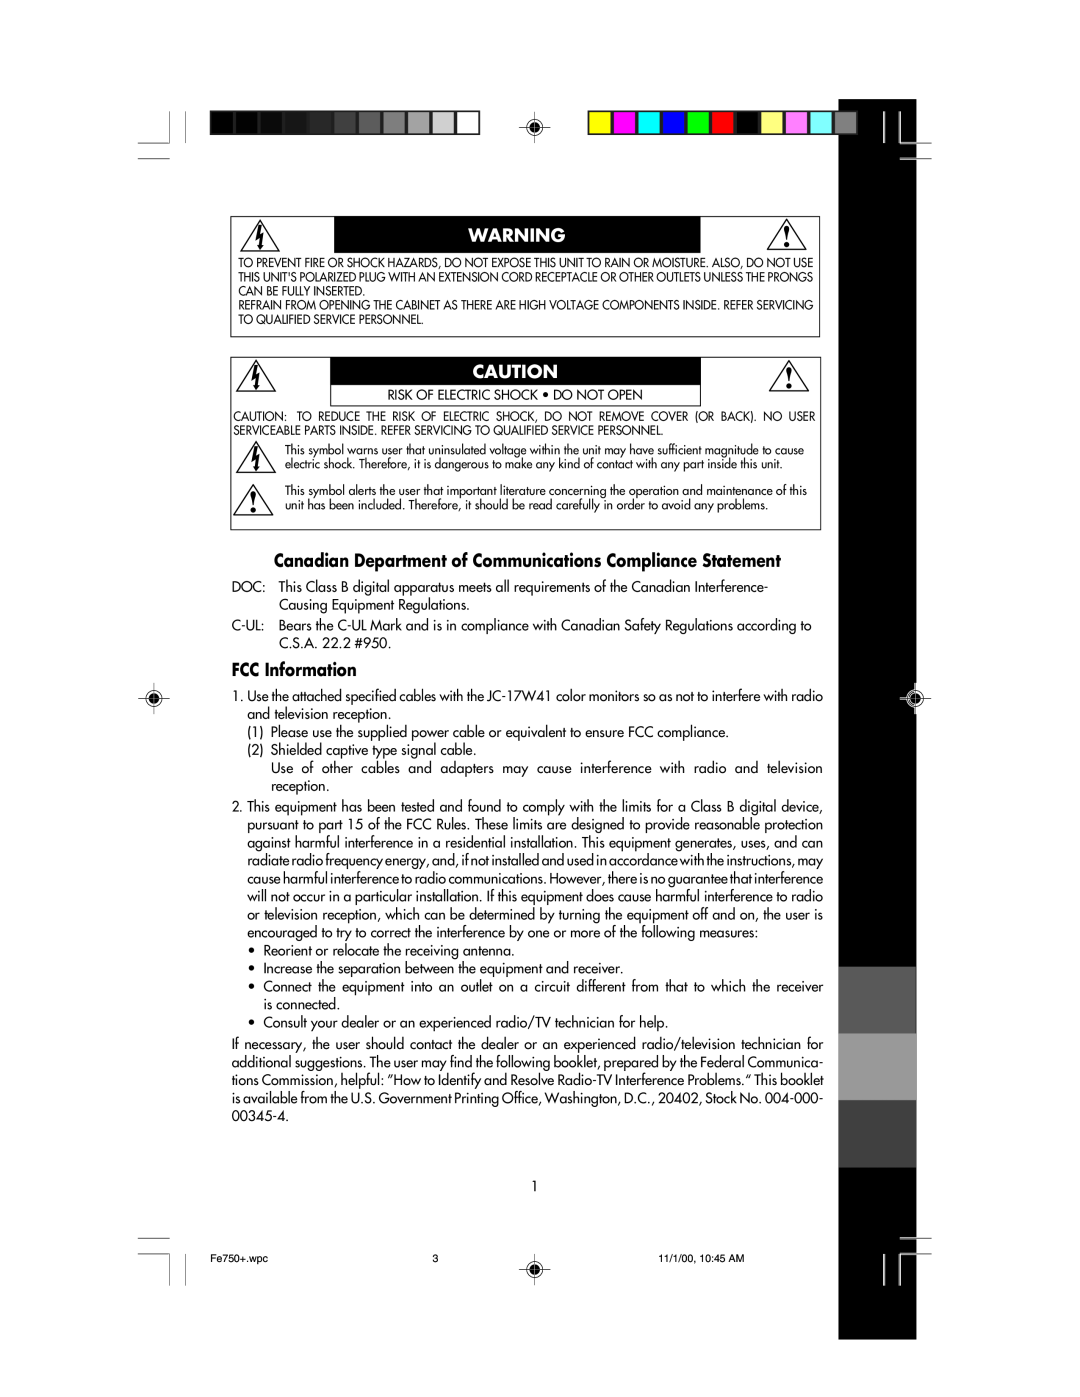 NEC FE750 Plus user manual Canadian Department of Communications Compliance Statement, FCC Information 